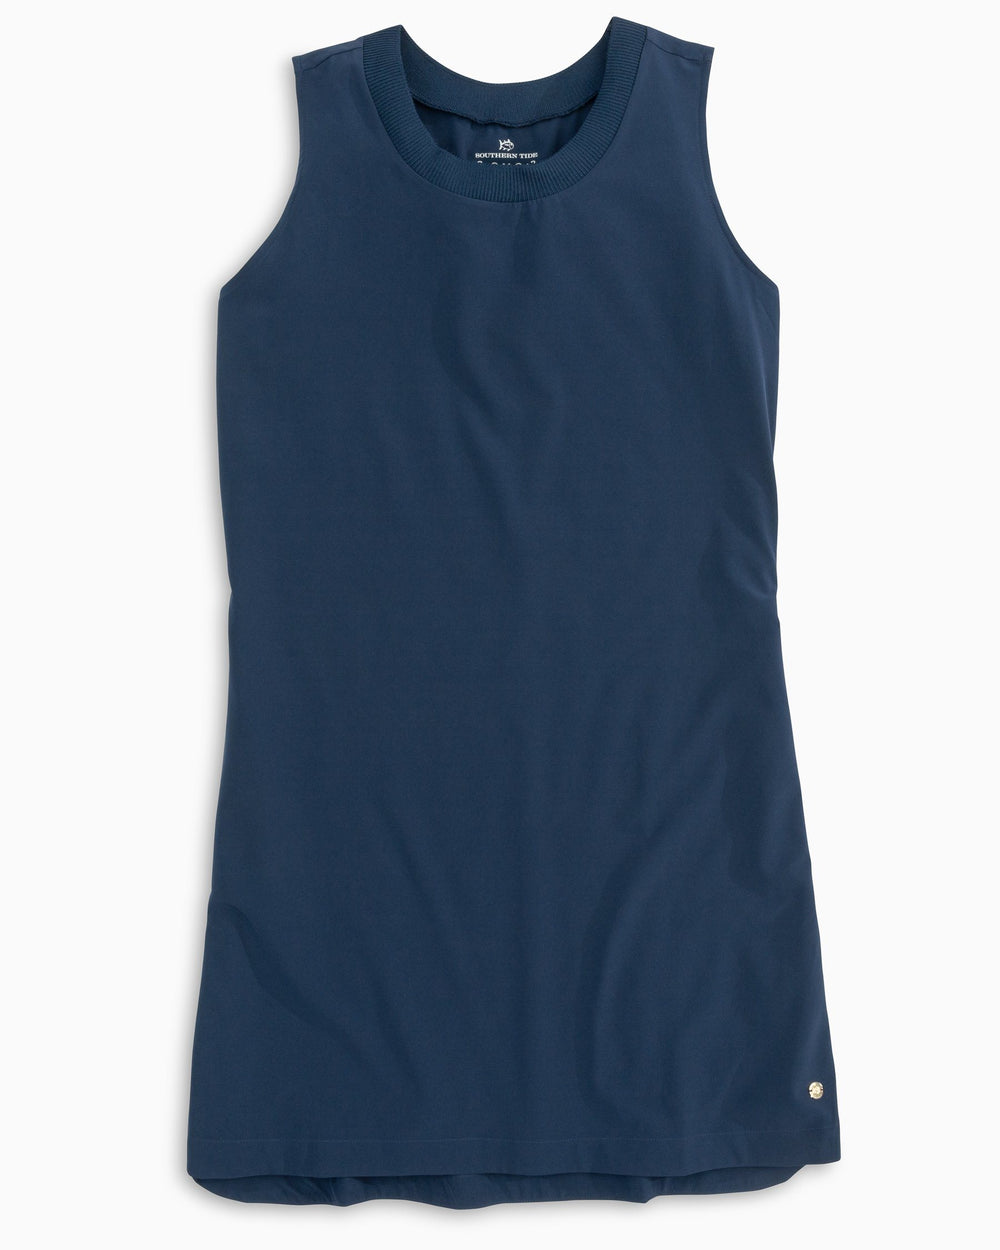 The flat view of the Women's Navy Gameday Dress by Southern Tide - Navy